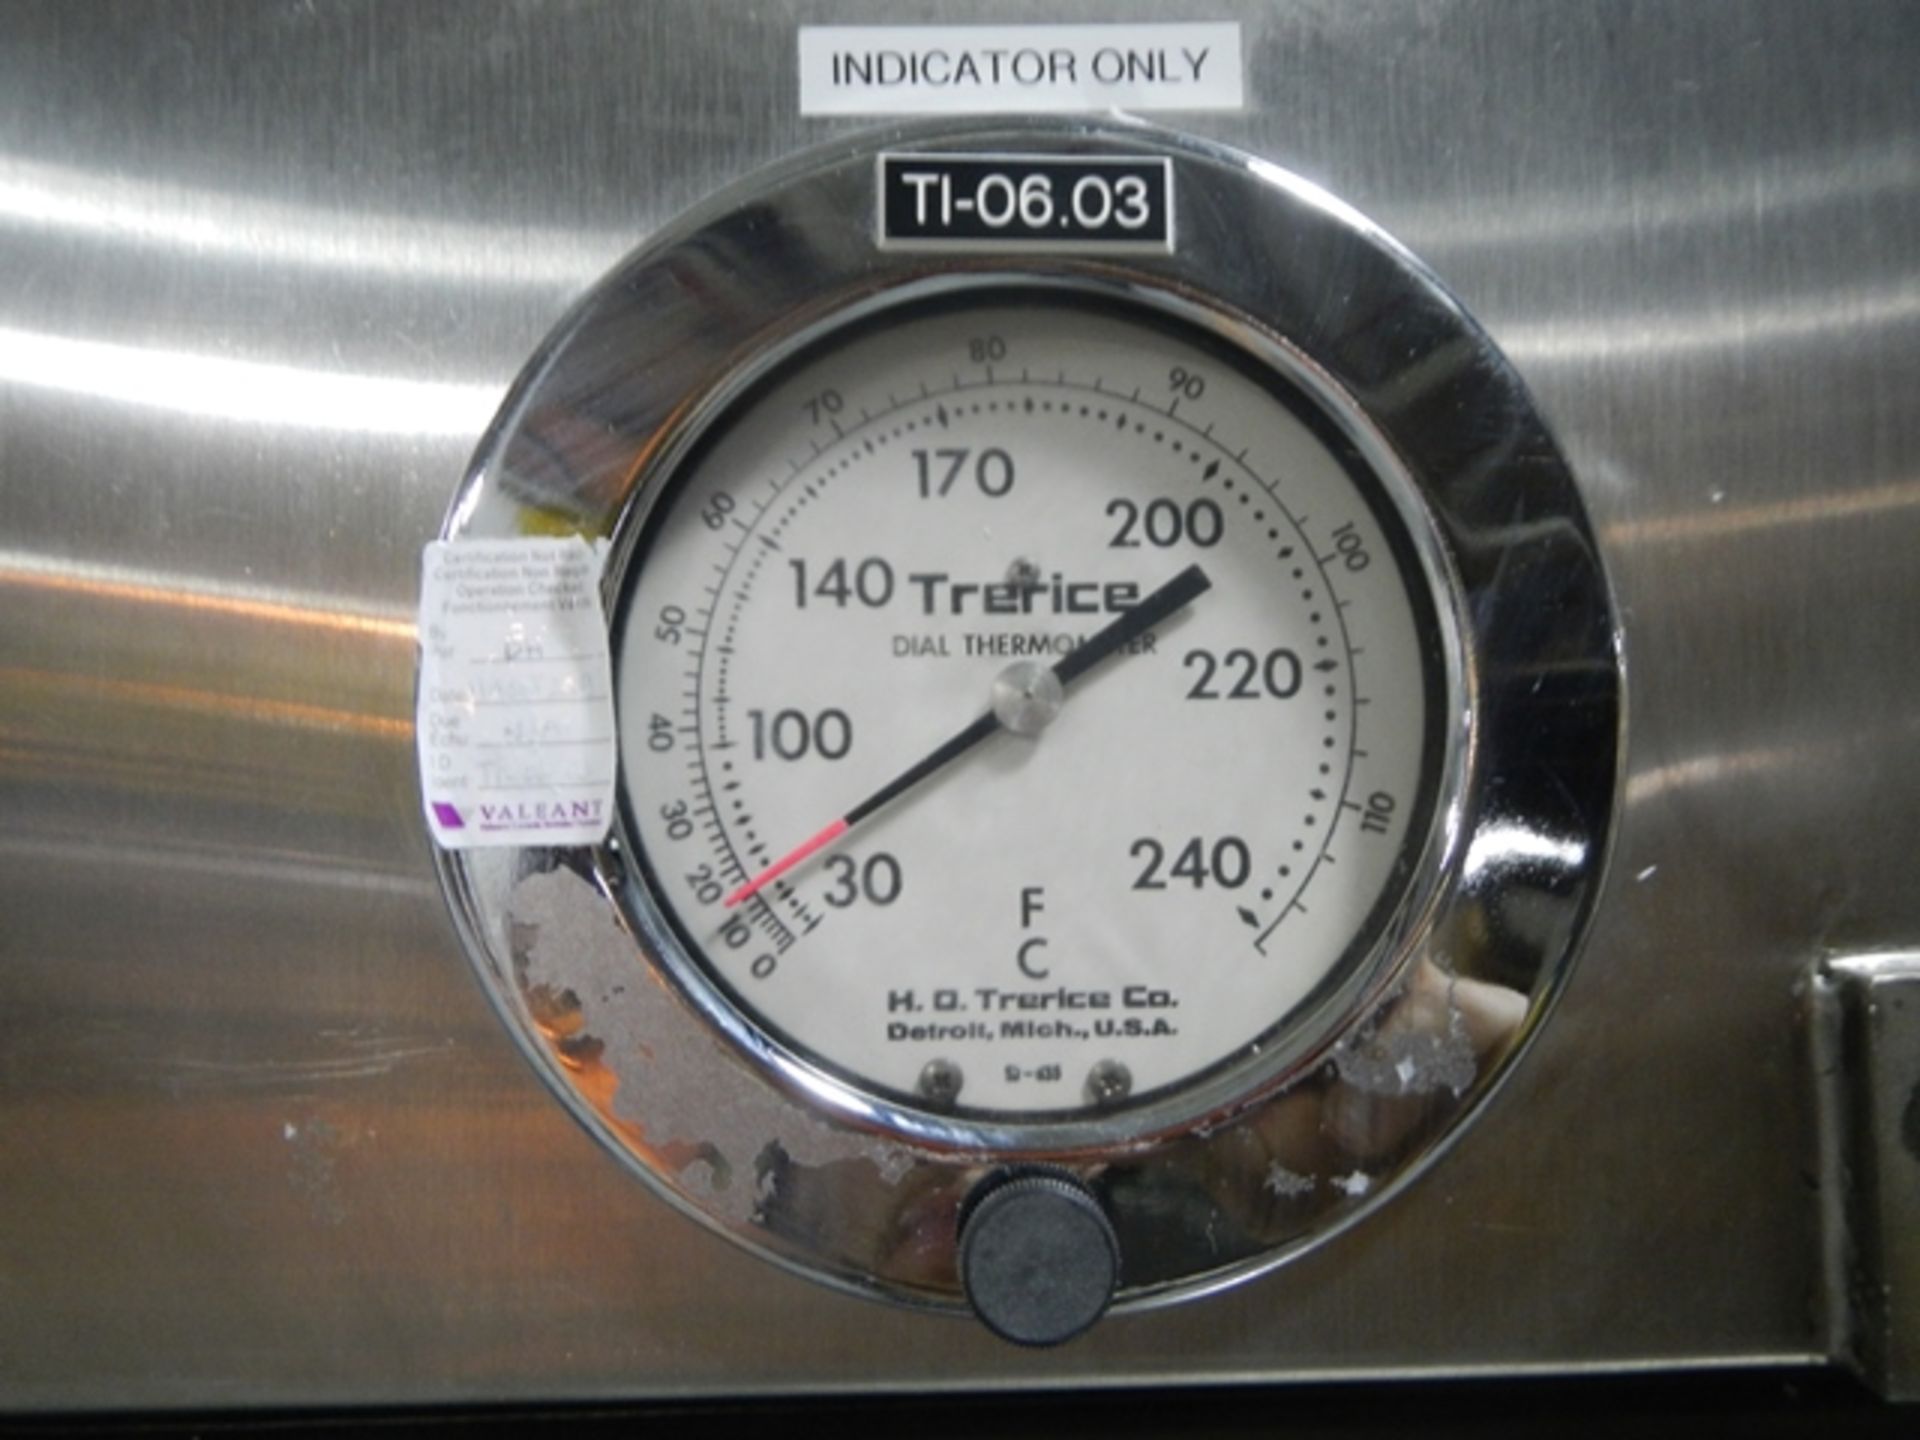 150 SQ FT STOKES OVEN, MODEL 38-7, 304 S/S - Image 8 of 9